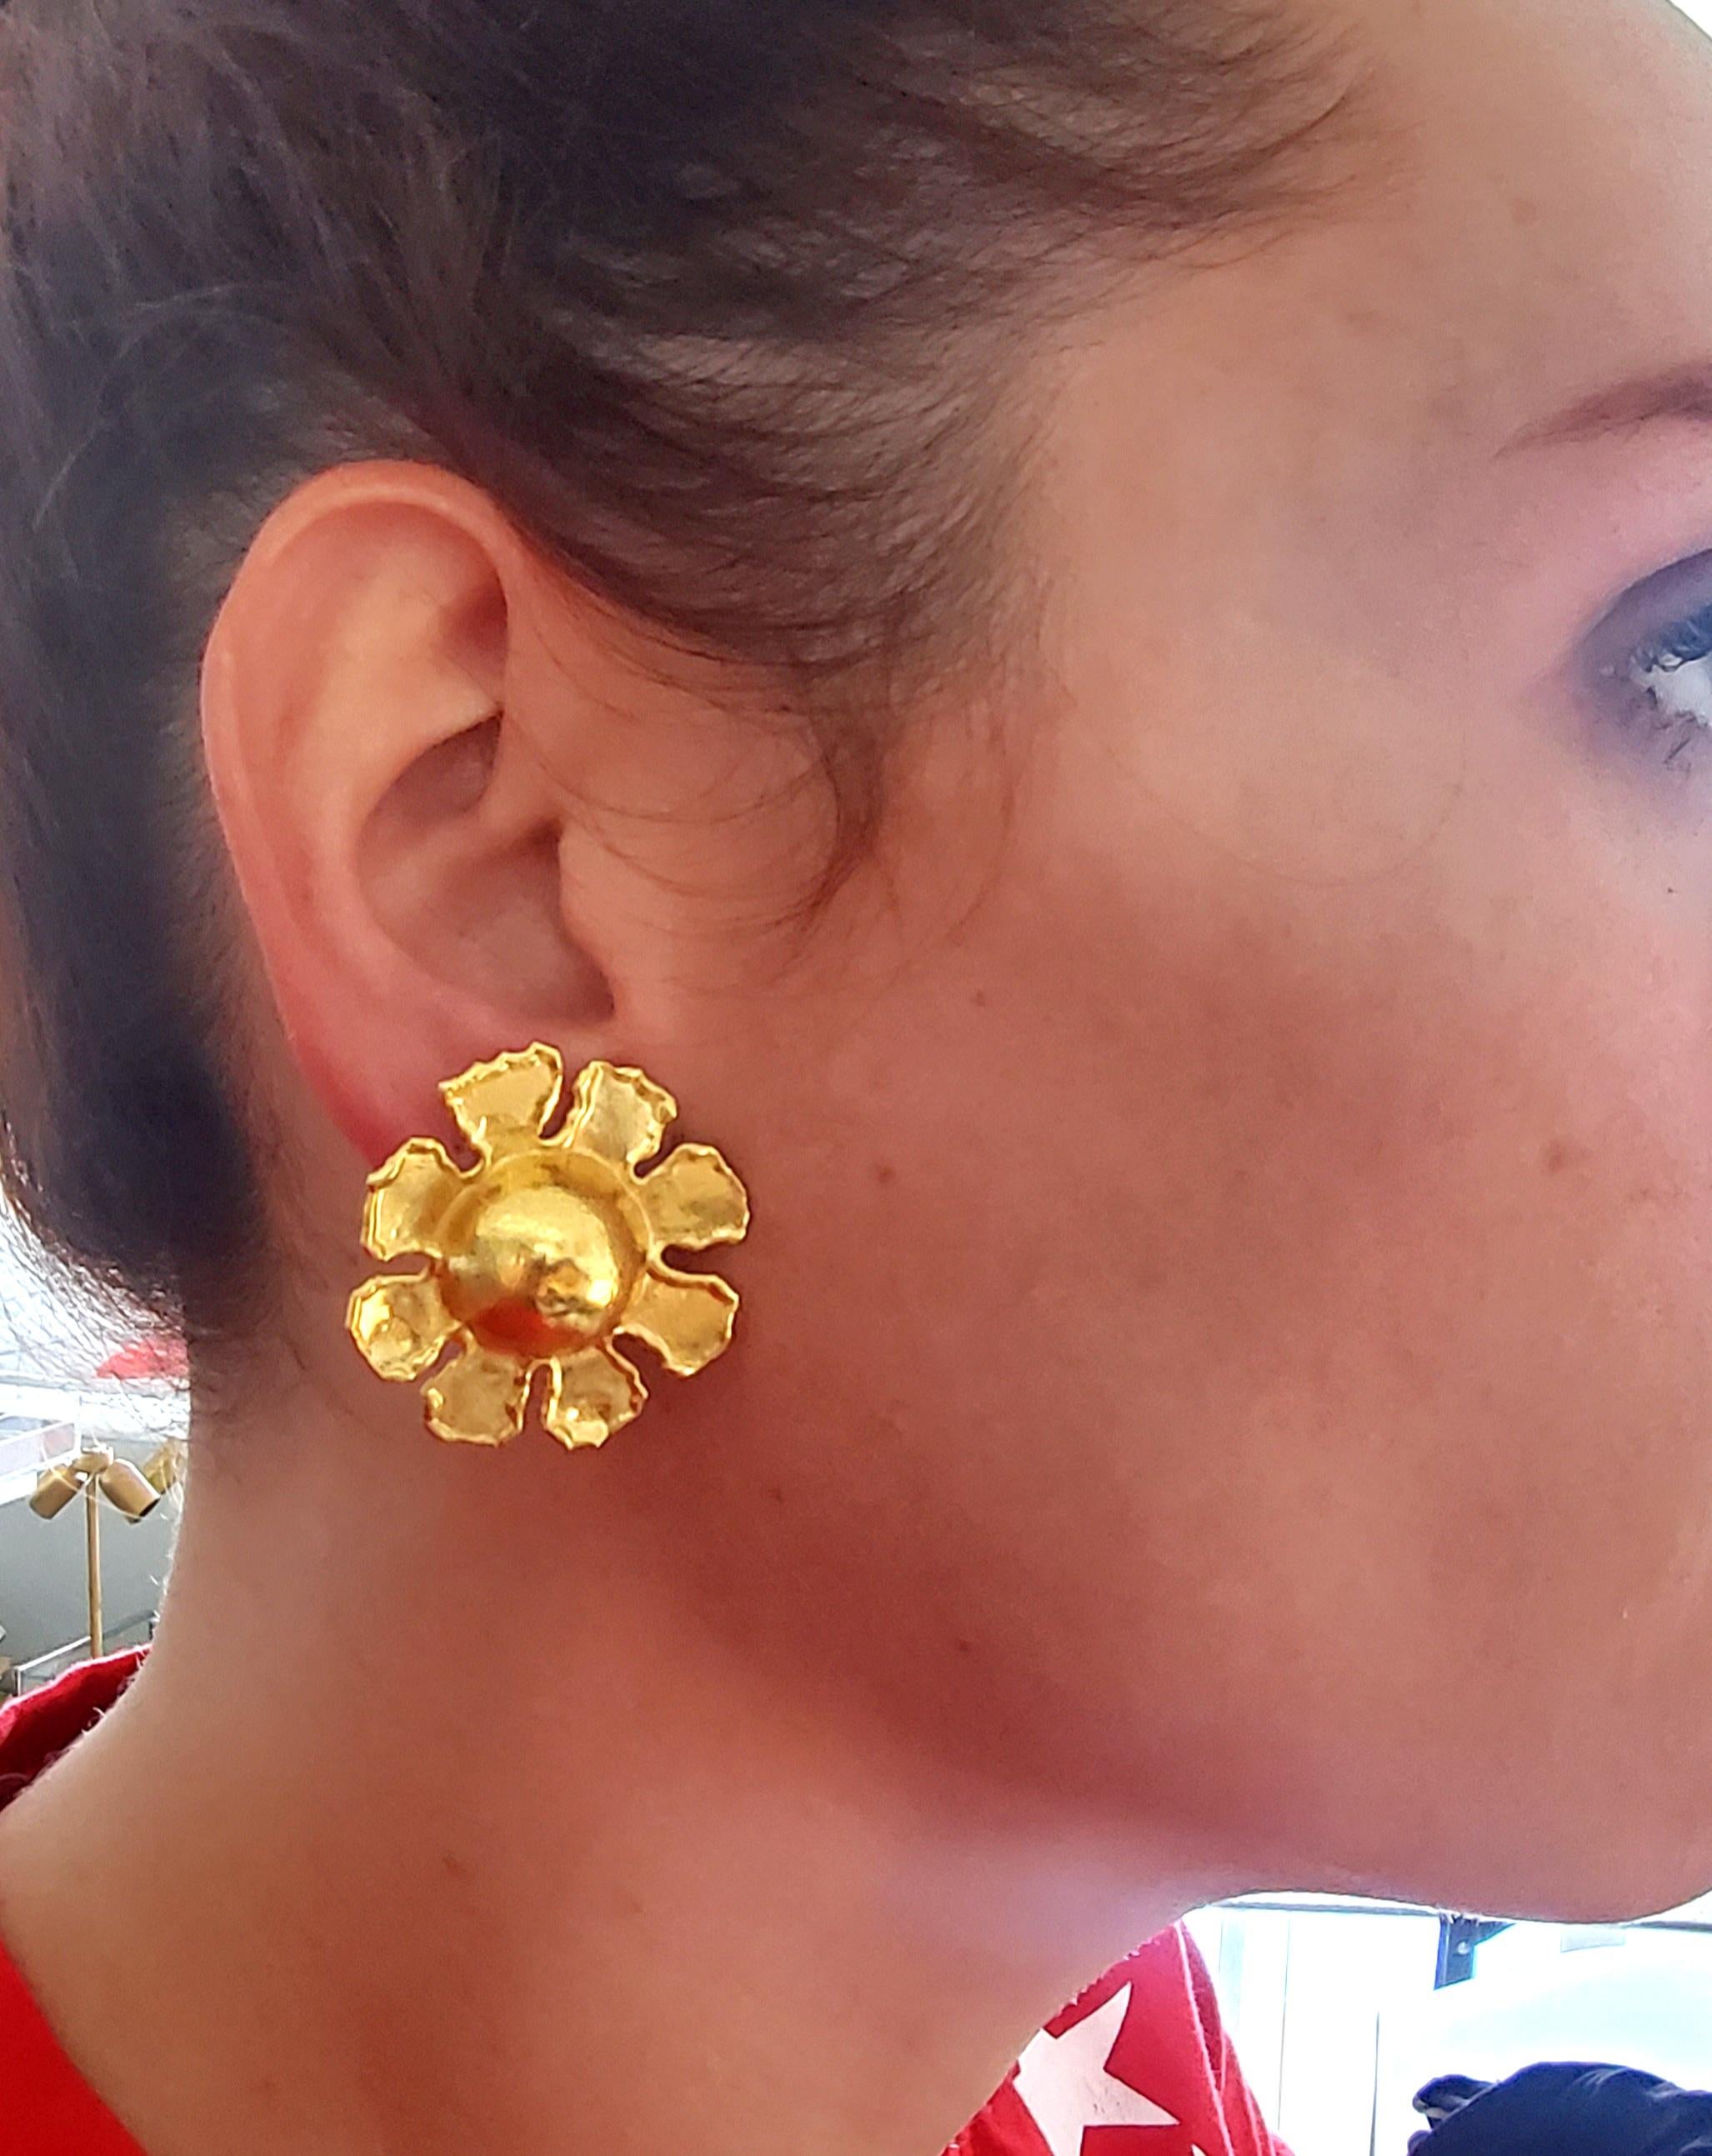 Textured sunburst earrings designed by Jean Mahie.

A beautiful pieces of art, created in Paris France by the artist and goldsmith Jean Mahie, back in the 1980's. These pair of sculptural ear-clips earrings has been crafted in solid yellow gold of